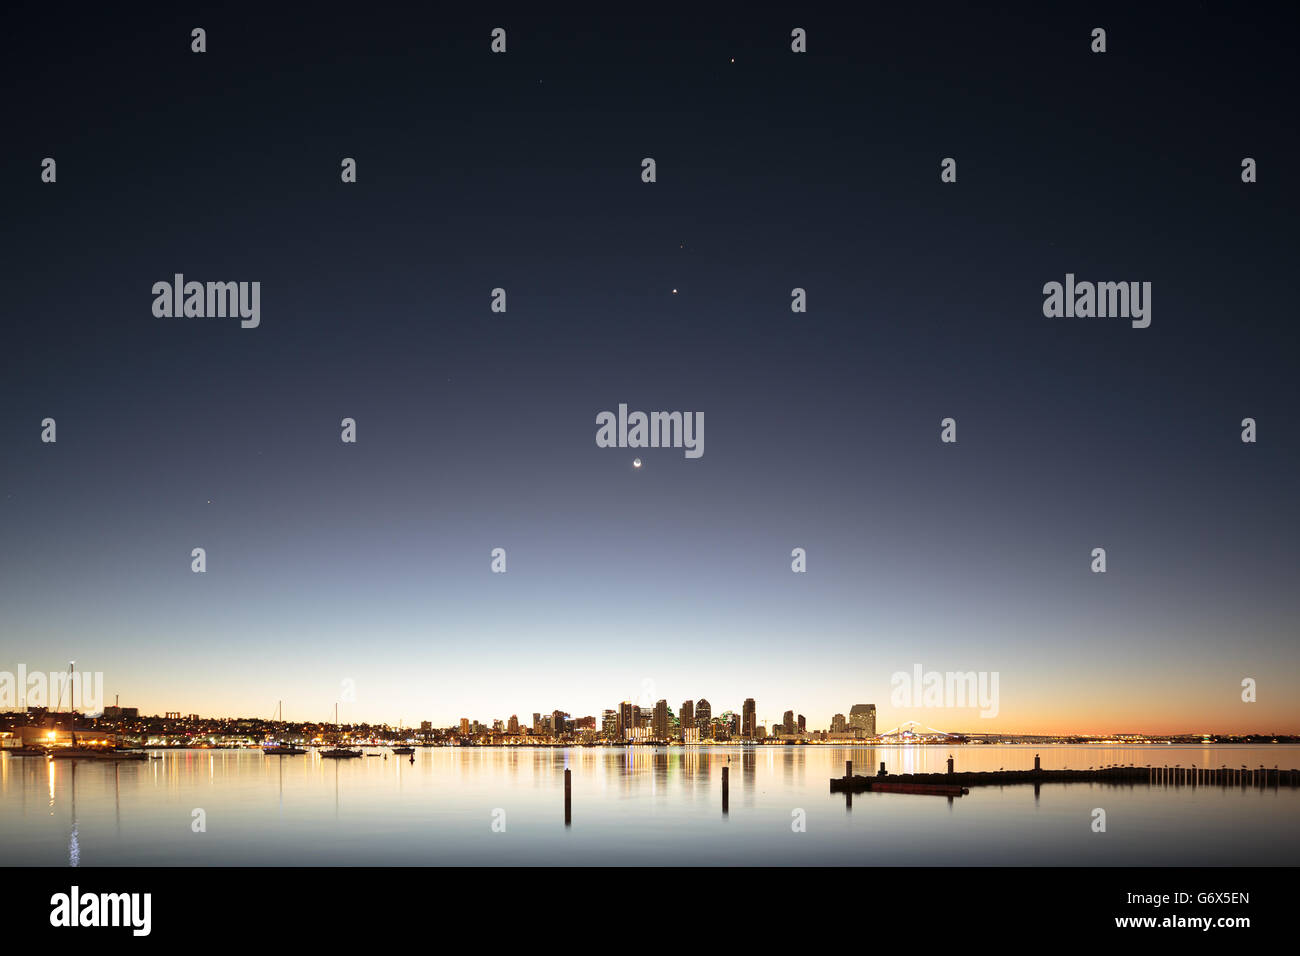 Planets aligned over San Diego Stock Photo